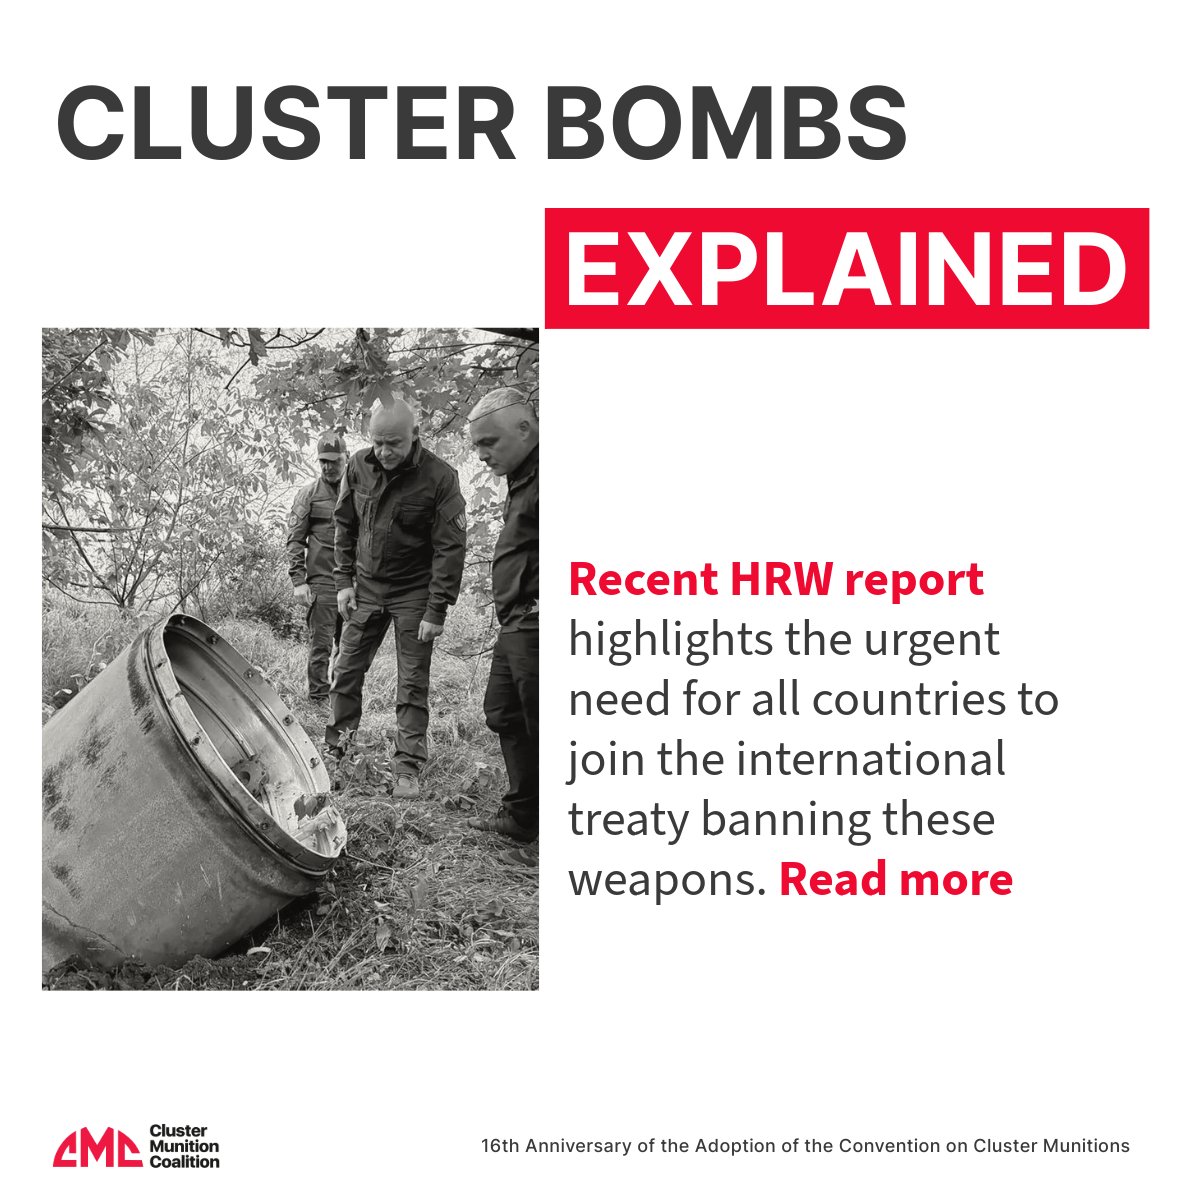 Celebrating 16 years of the Convention on Cluster Munitions, recent civilian harm underscores the urgent need for all countries to join the treaty. HRW’s latest report highlights this reality. #banclusterbombs bit.ly/4aE3gIK